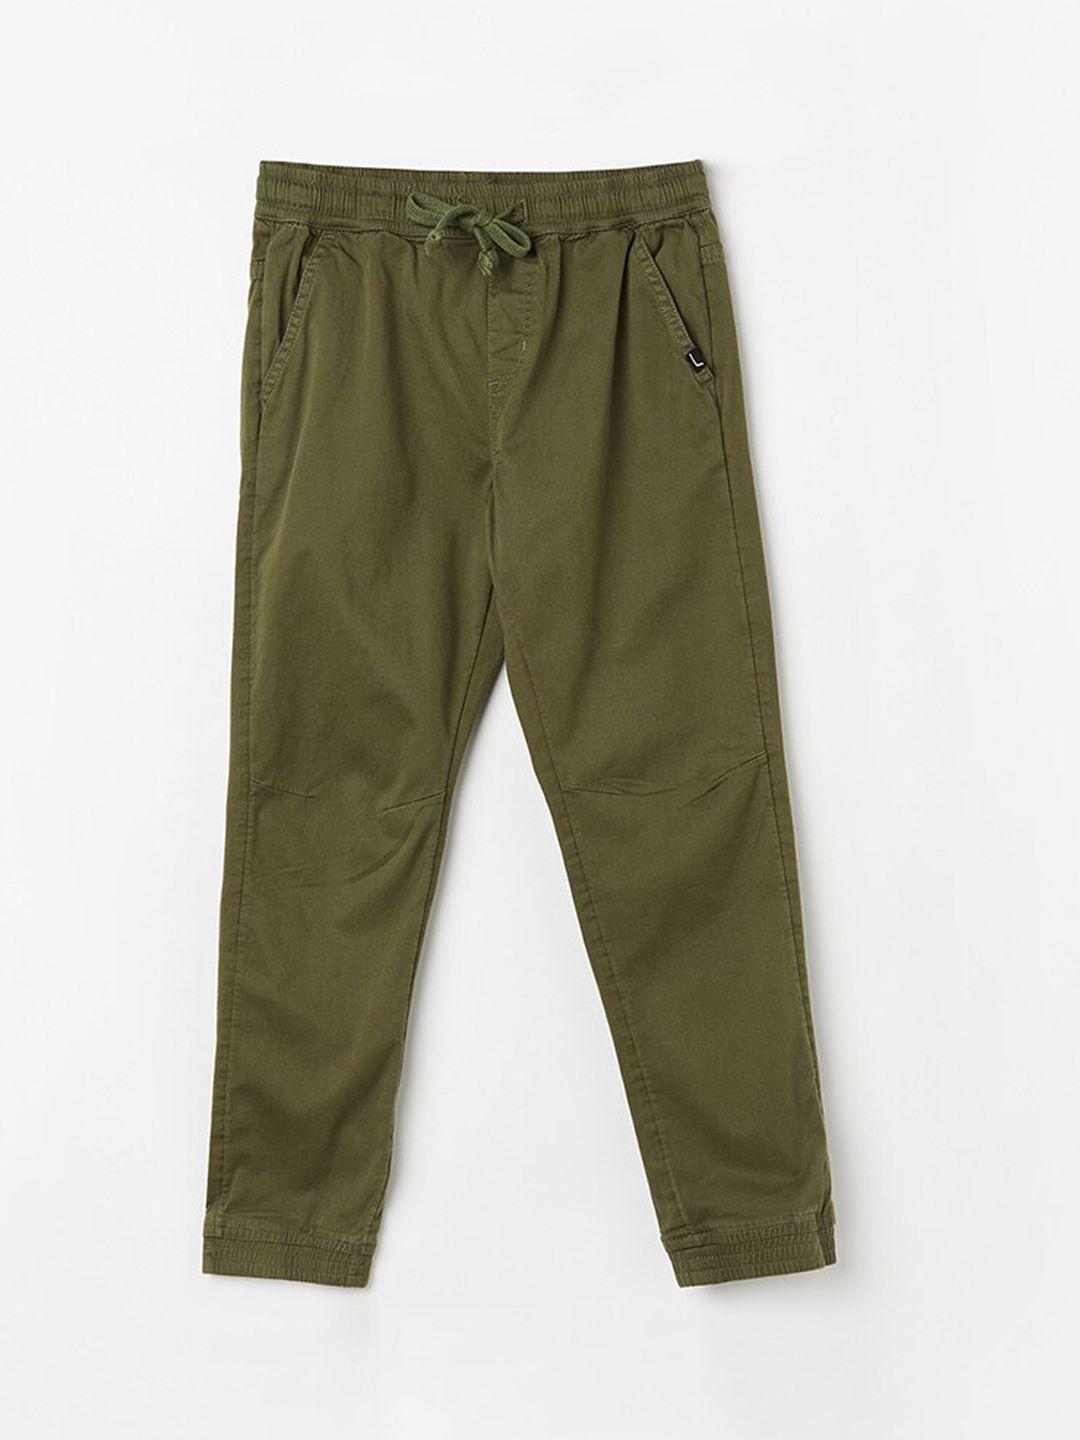 fame forever by lifestyle boys olive green trousers